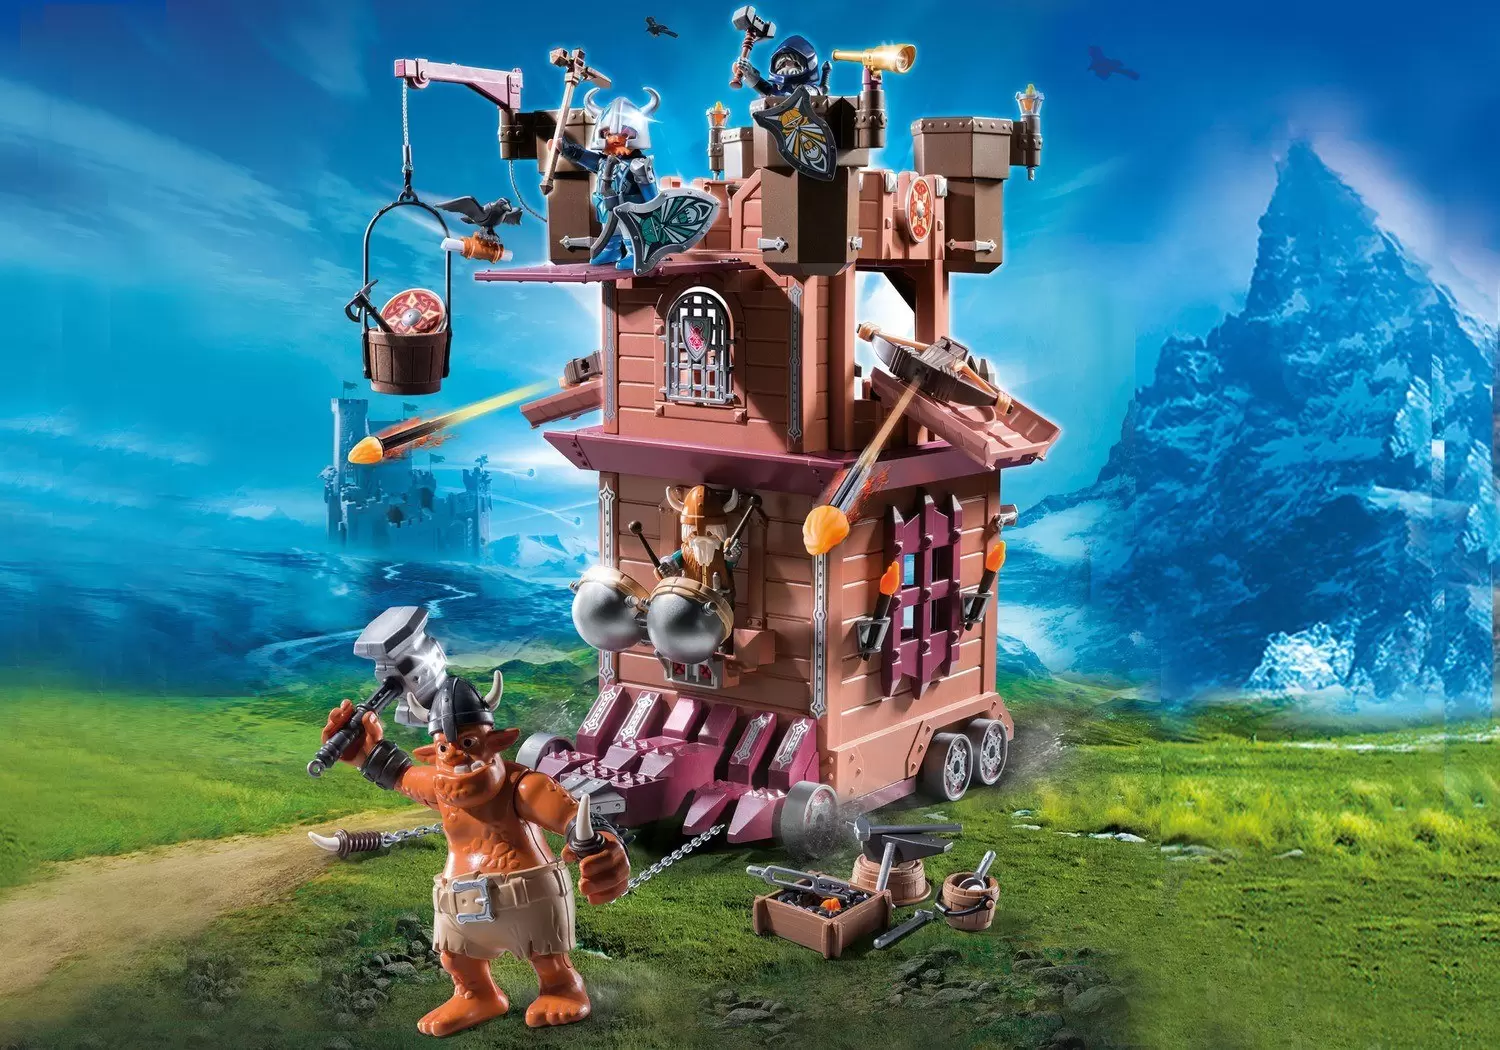 Playmobil Middle-Ages - Mobile Dwarven Fortress